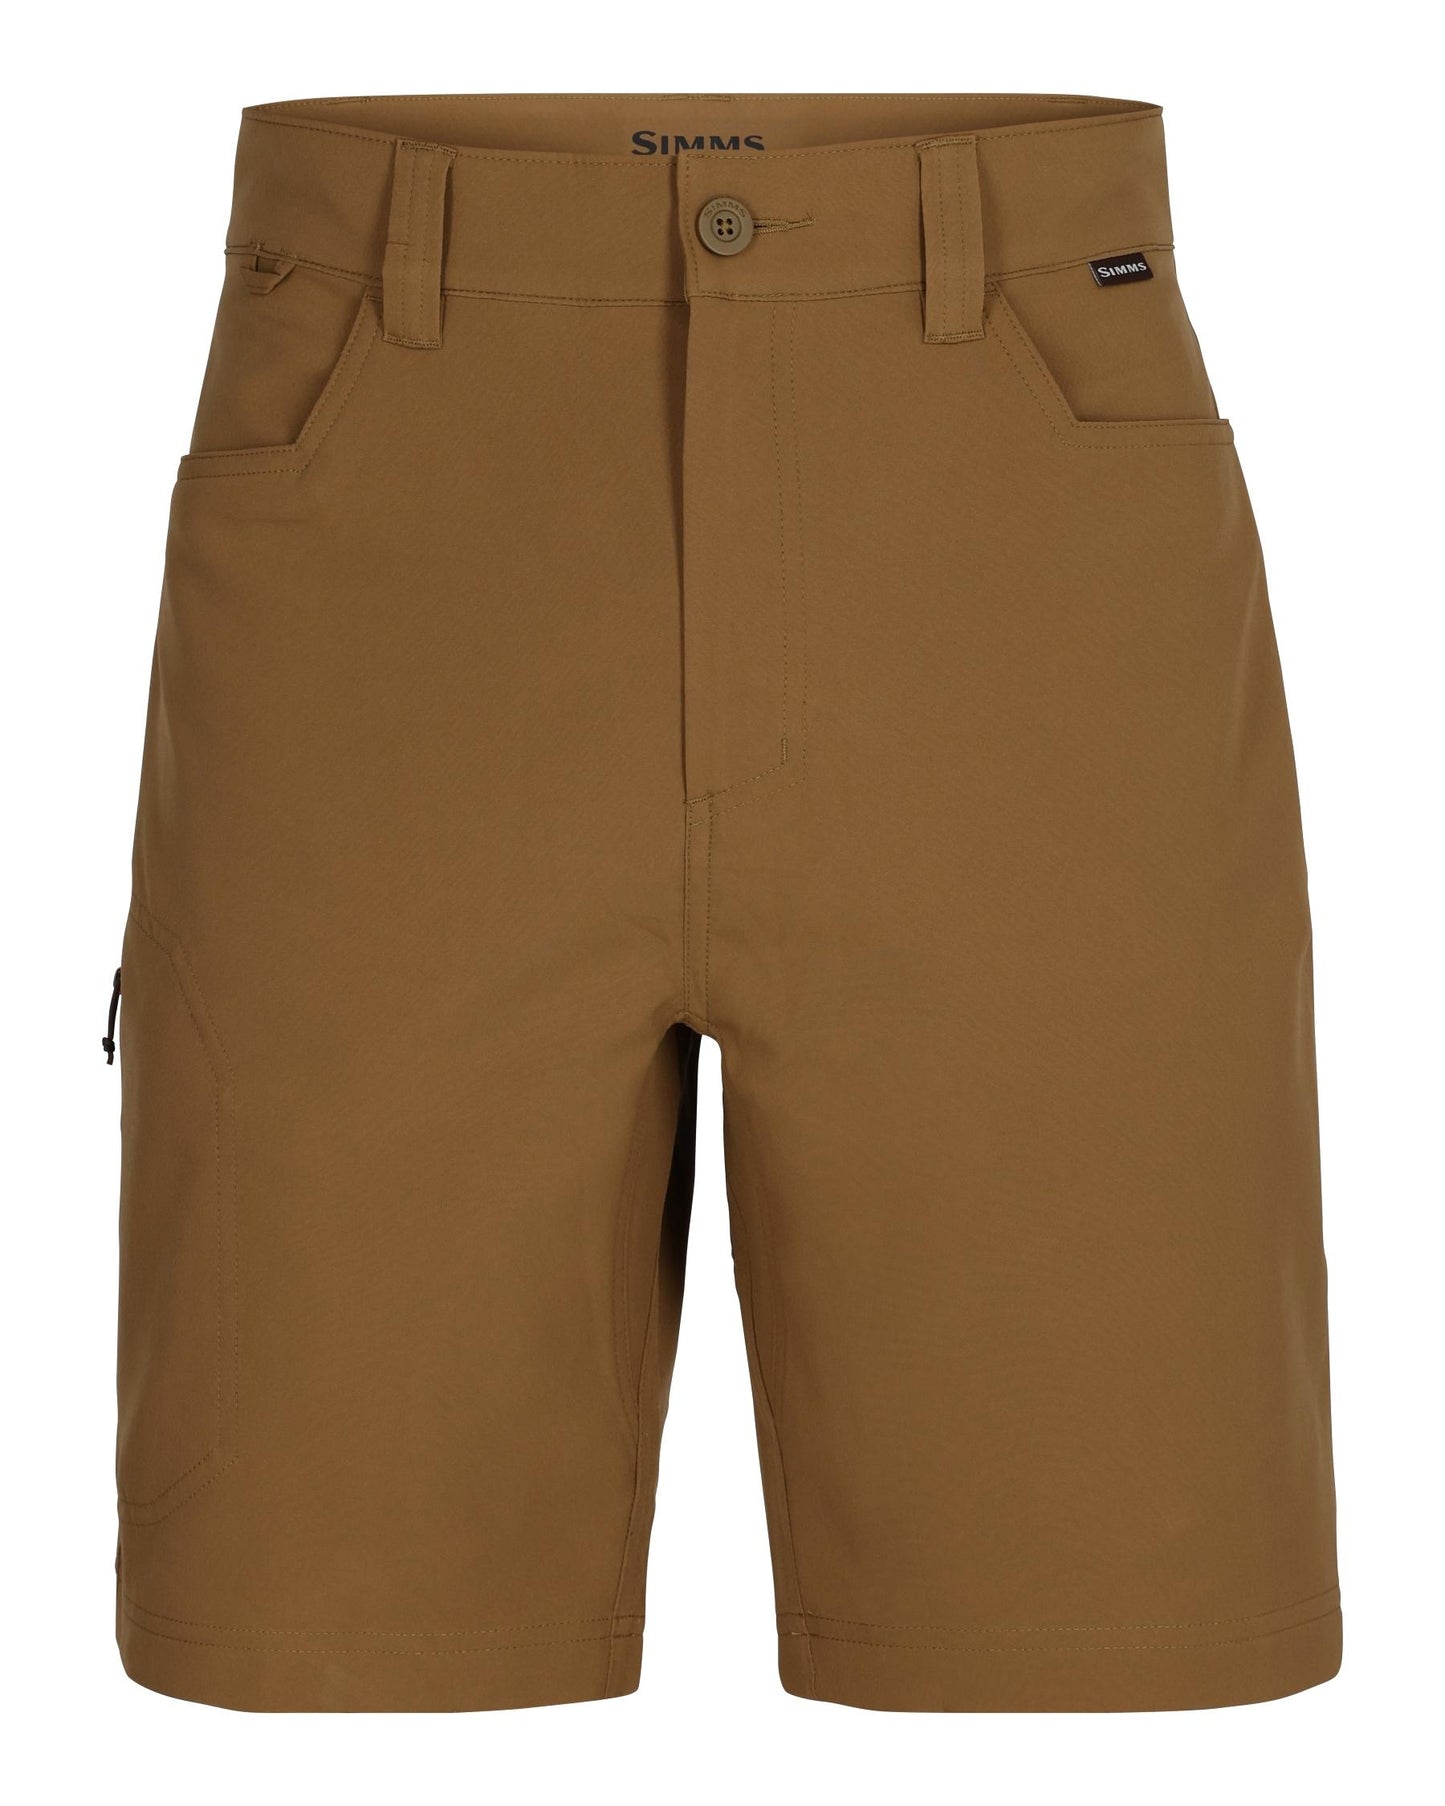 M's Skiff Shorts  Simms Fishing Products